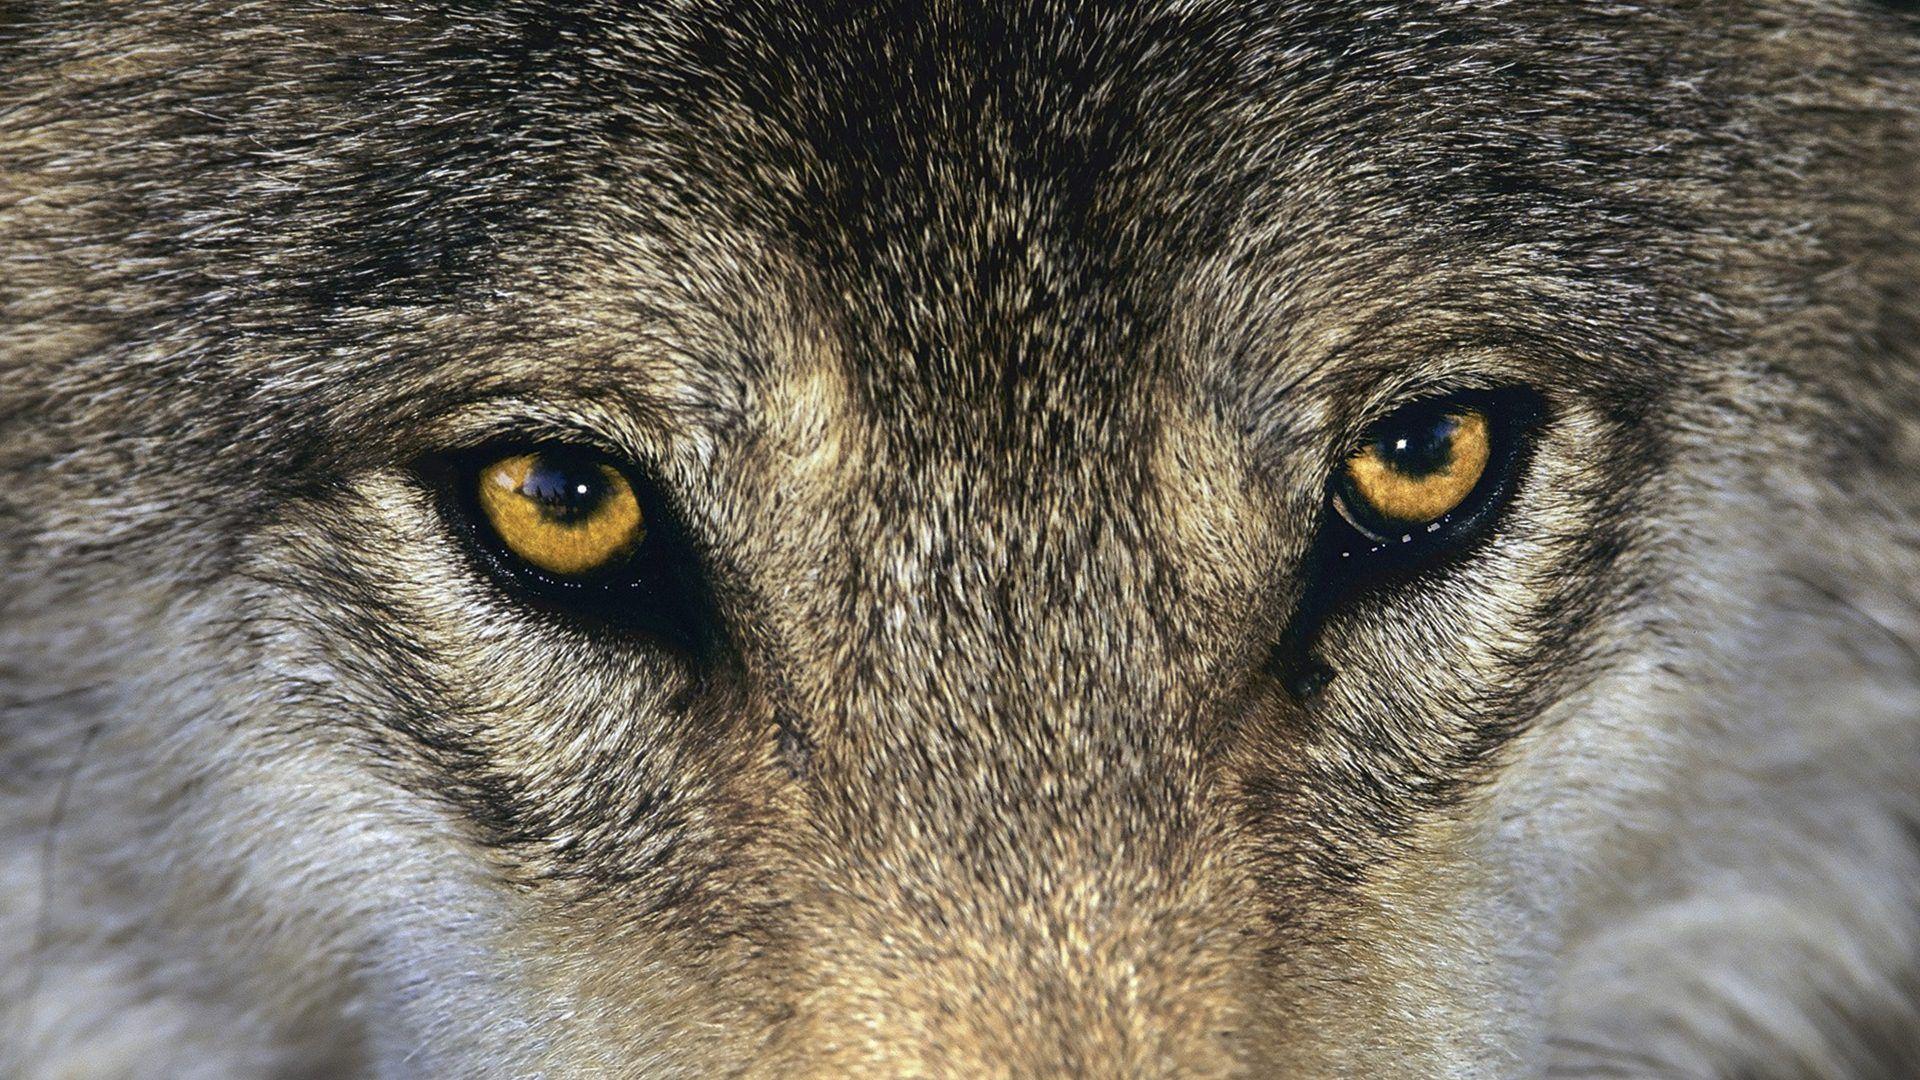 1920X1080 Wolf Eyes Wallpapers - Top Free 1920X1080 Wolf Eyes ...